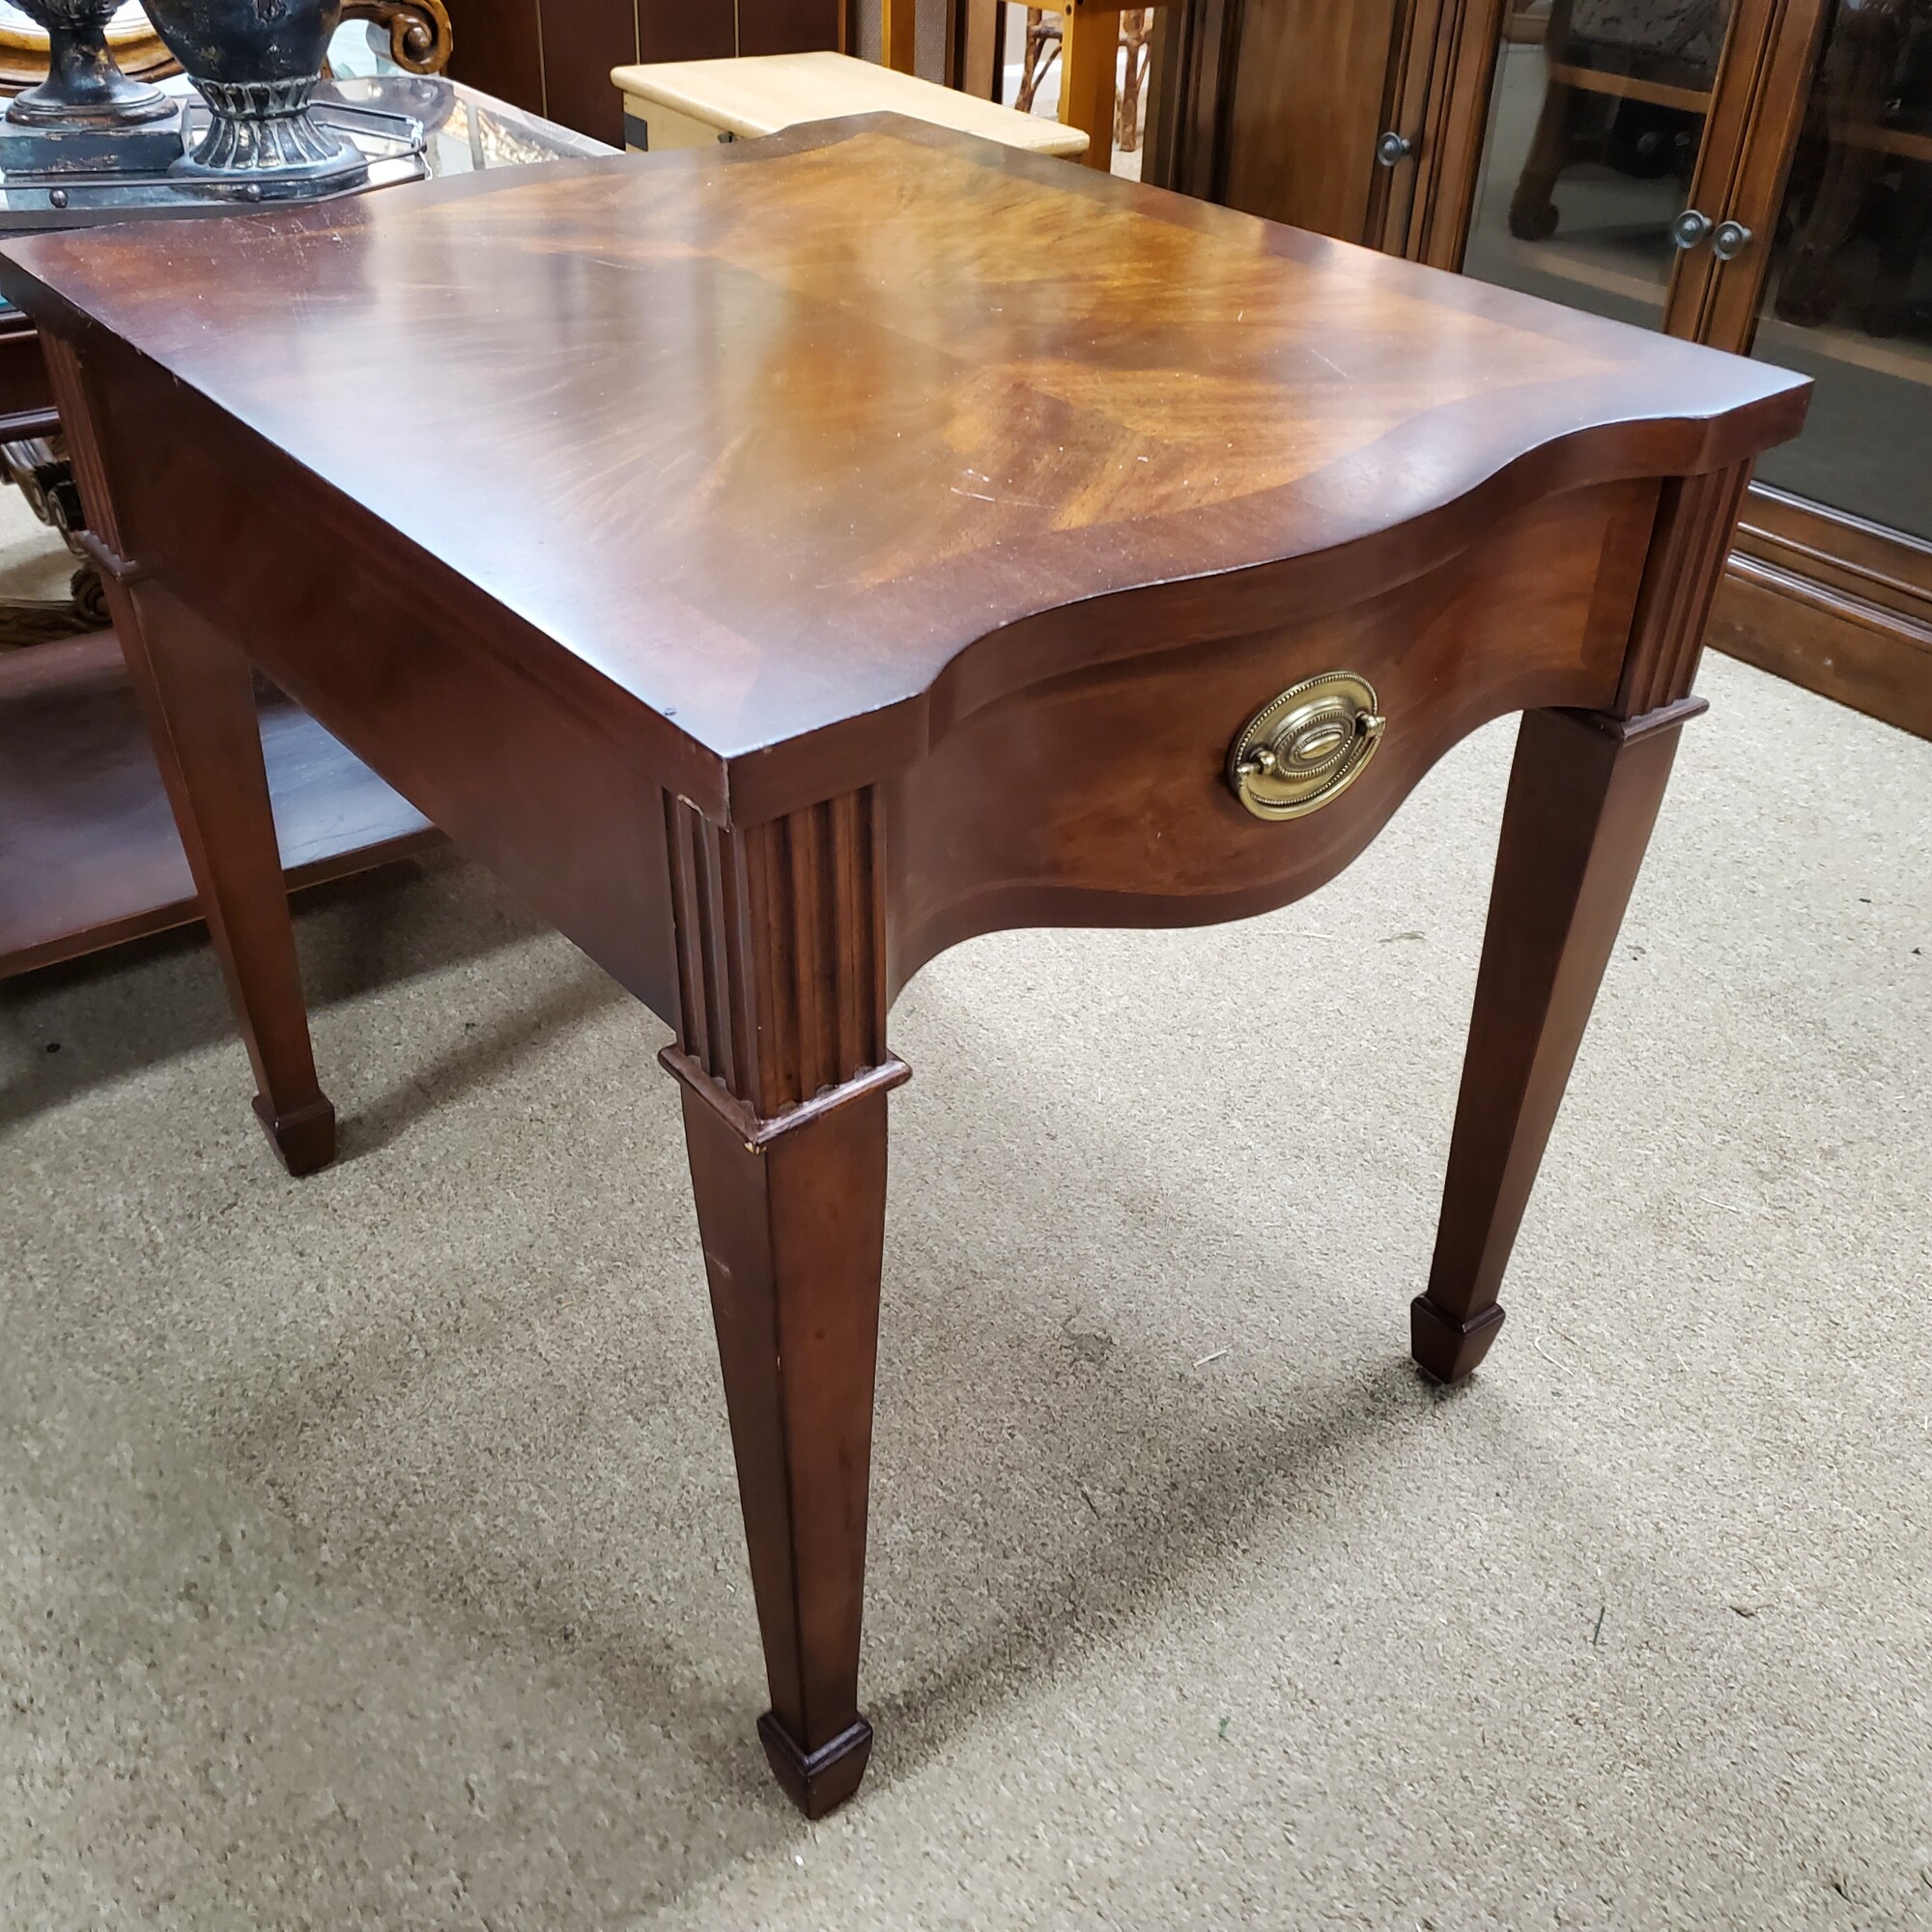 Broyhill End Table, Size: 23x27x25